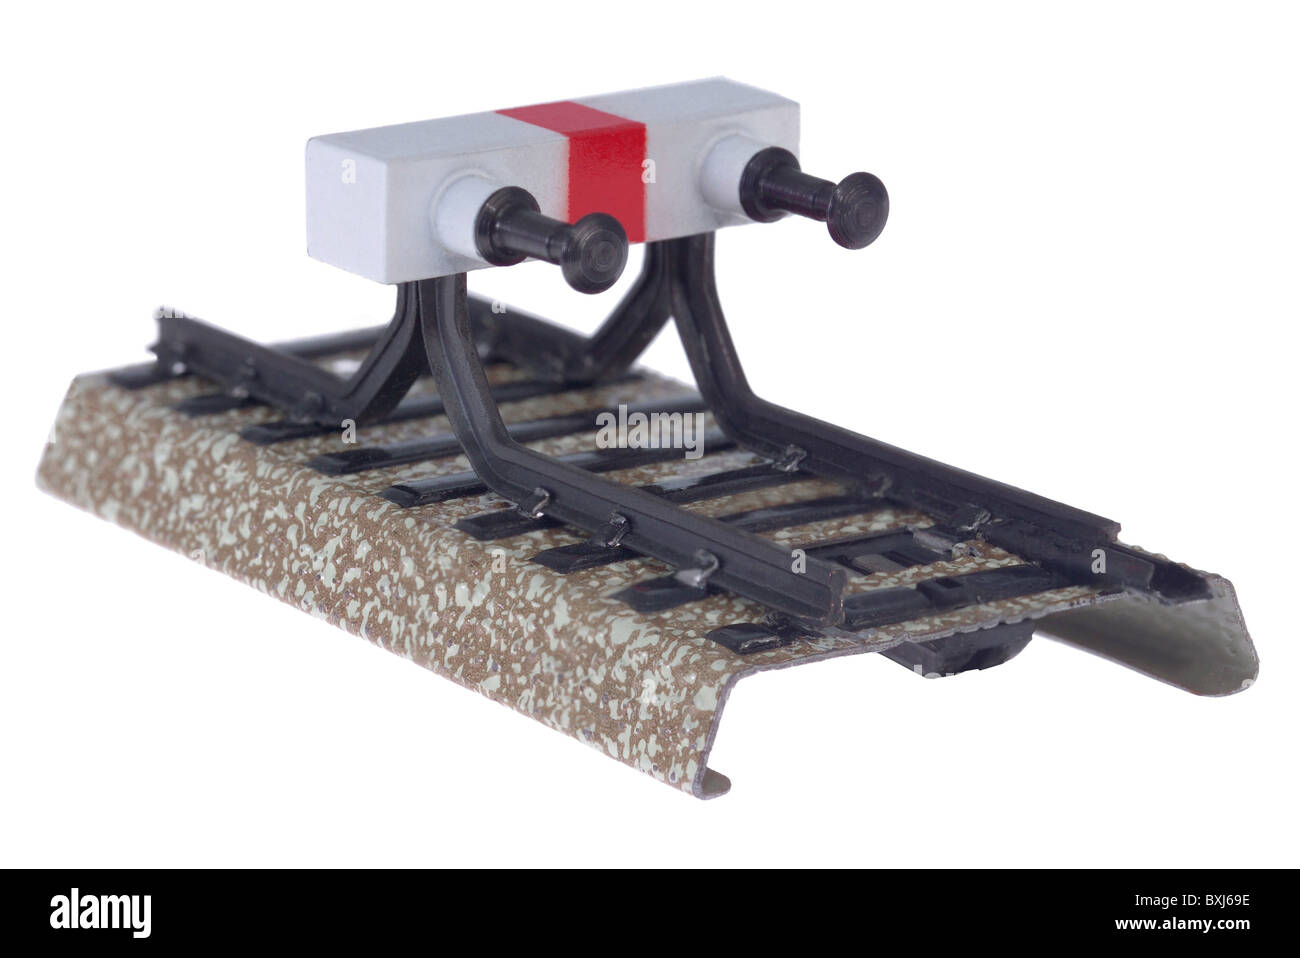 toy, model railway, buffer stop, terminus, Germany, 20th century, historic, historical, abandonment, layoff, closedown, closing-down, shutdown, abandonments, layoffs, closedowns, closing-downs, shutdowns, line, track, lines, tracks, monotrack, dual track, dead-end street, dead end, railway, railroad, railways, railroads, rail, rails, lay track, Märklin, clipping, cut out, cut-out, cut-outs, Marklin, Maerklin, Additional-Rights-Clearences-Not Available Stock Photo